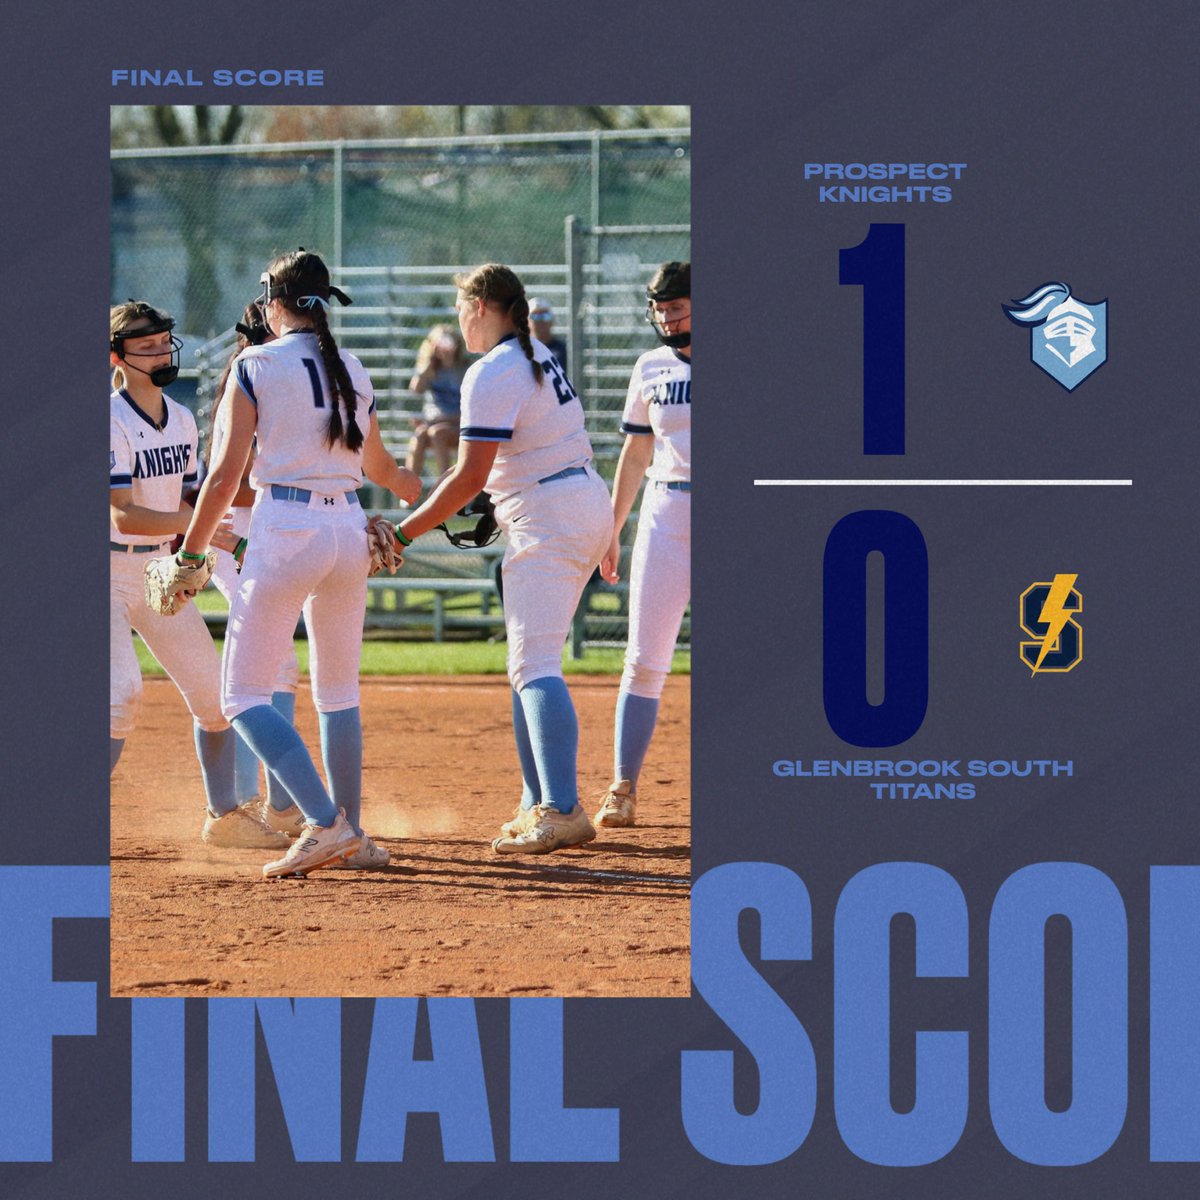 GREAT win tonight in a 9 inning battle w GBS. Rachael Sasanuma w a 💣 in the 9th to score the only run of the game! Lina Calvacca (W) phenomenal on the mound - only 4 hits w 5 Ks. Amazing defense all around. We are back in action tmo for the Regional Championship! #NoworNever